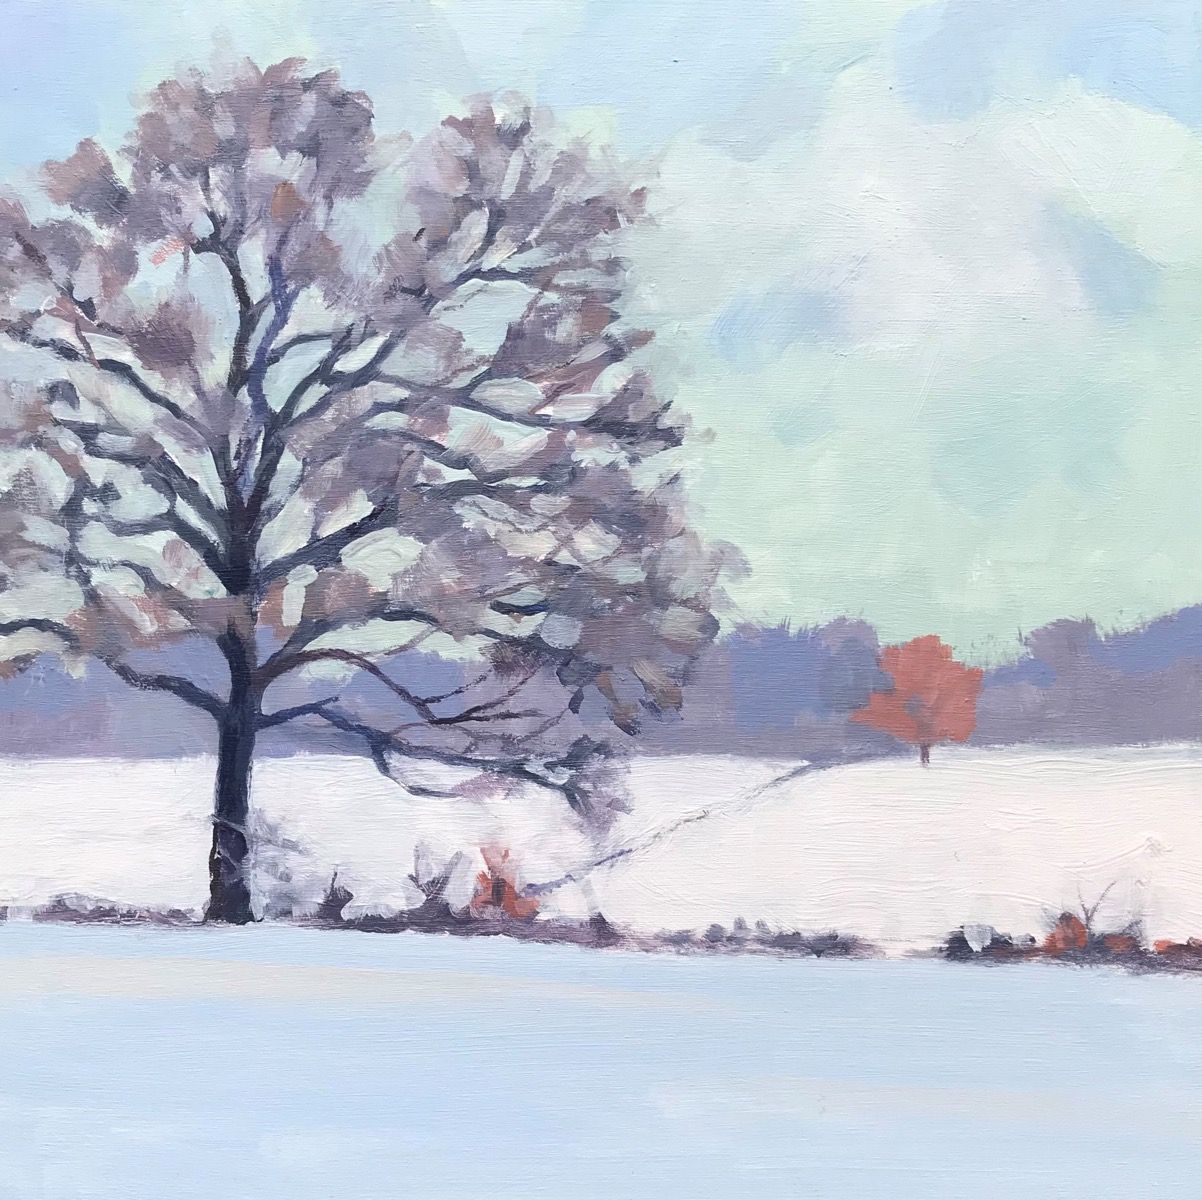 Snow in the Fields by Margaret Crutchley